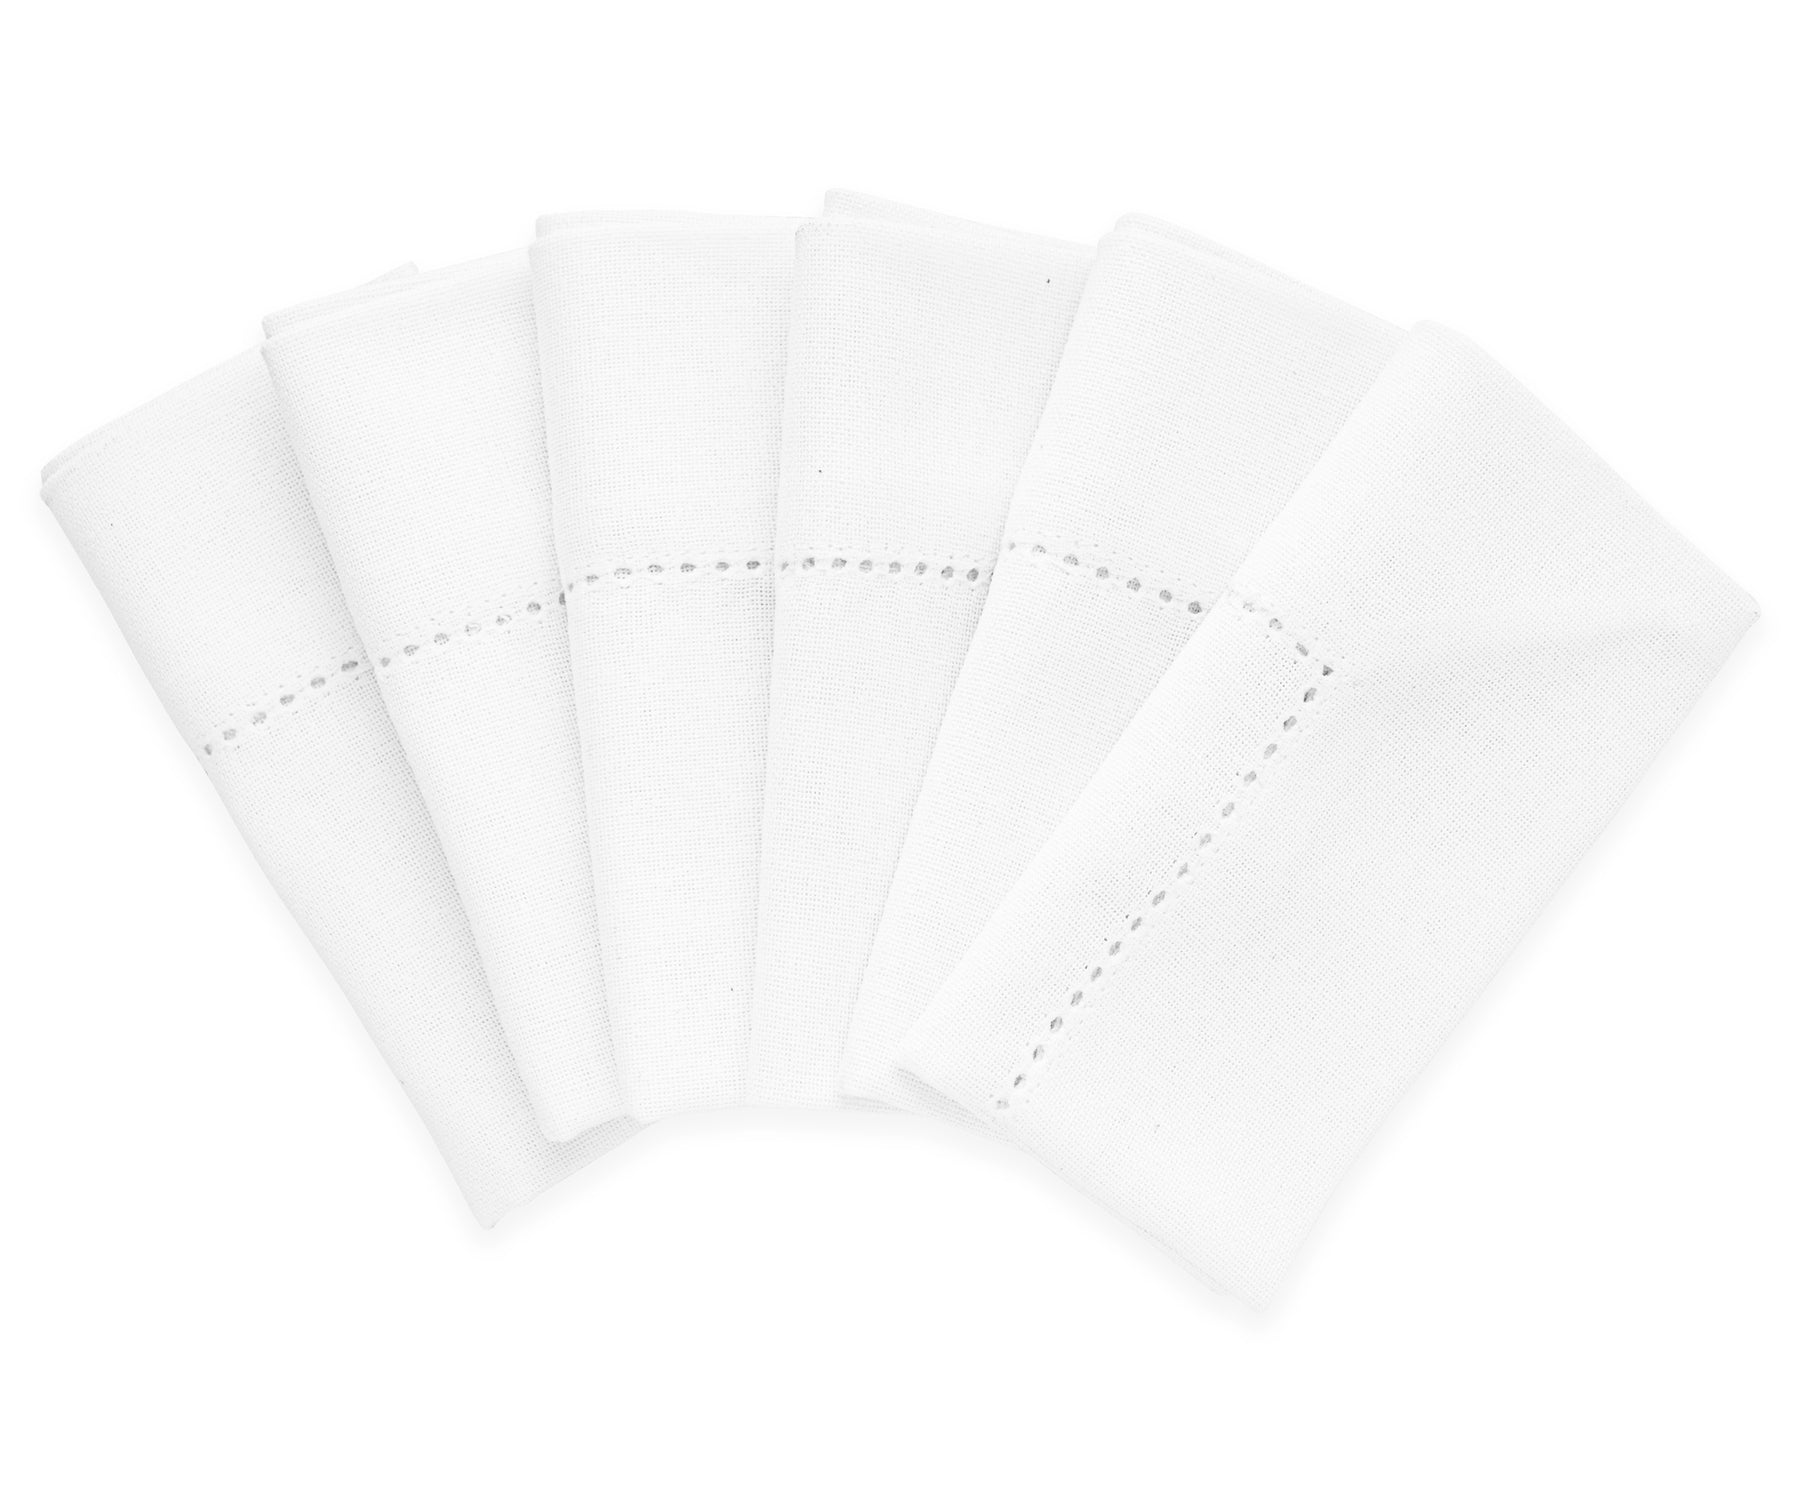 linen hemstitch napkins are adding a touch of refinement and sophistication to the overall design.